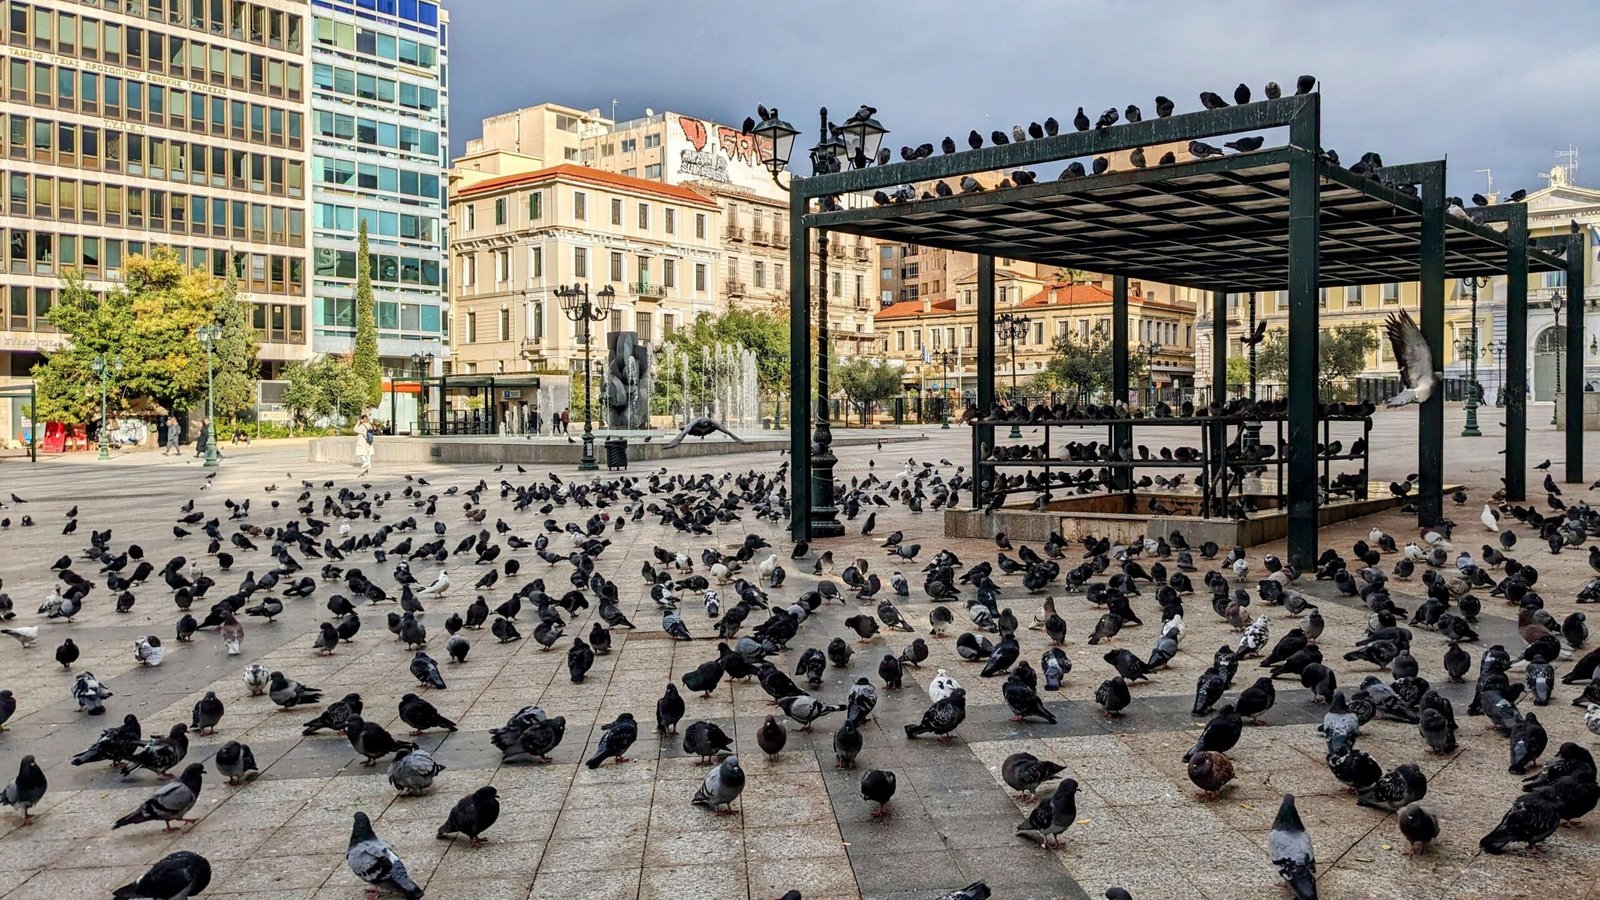 lots of pigeons in athens